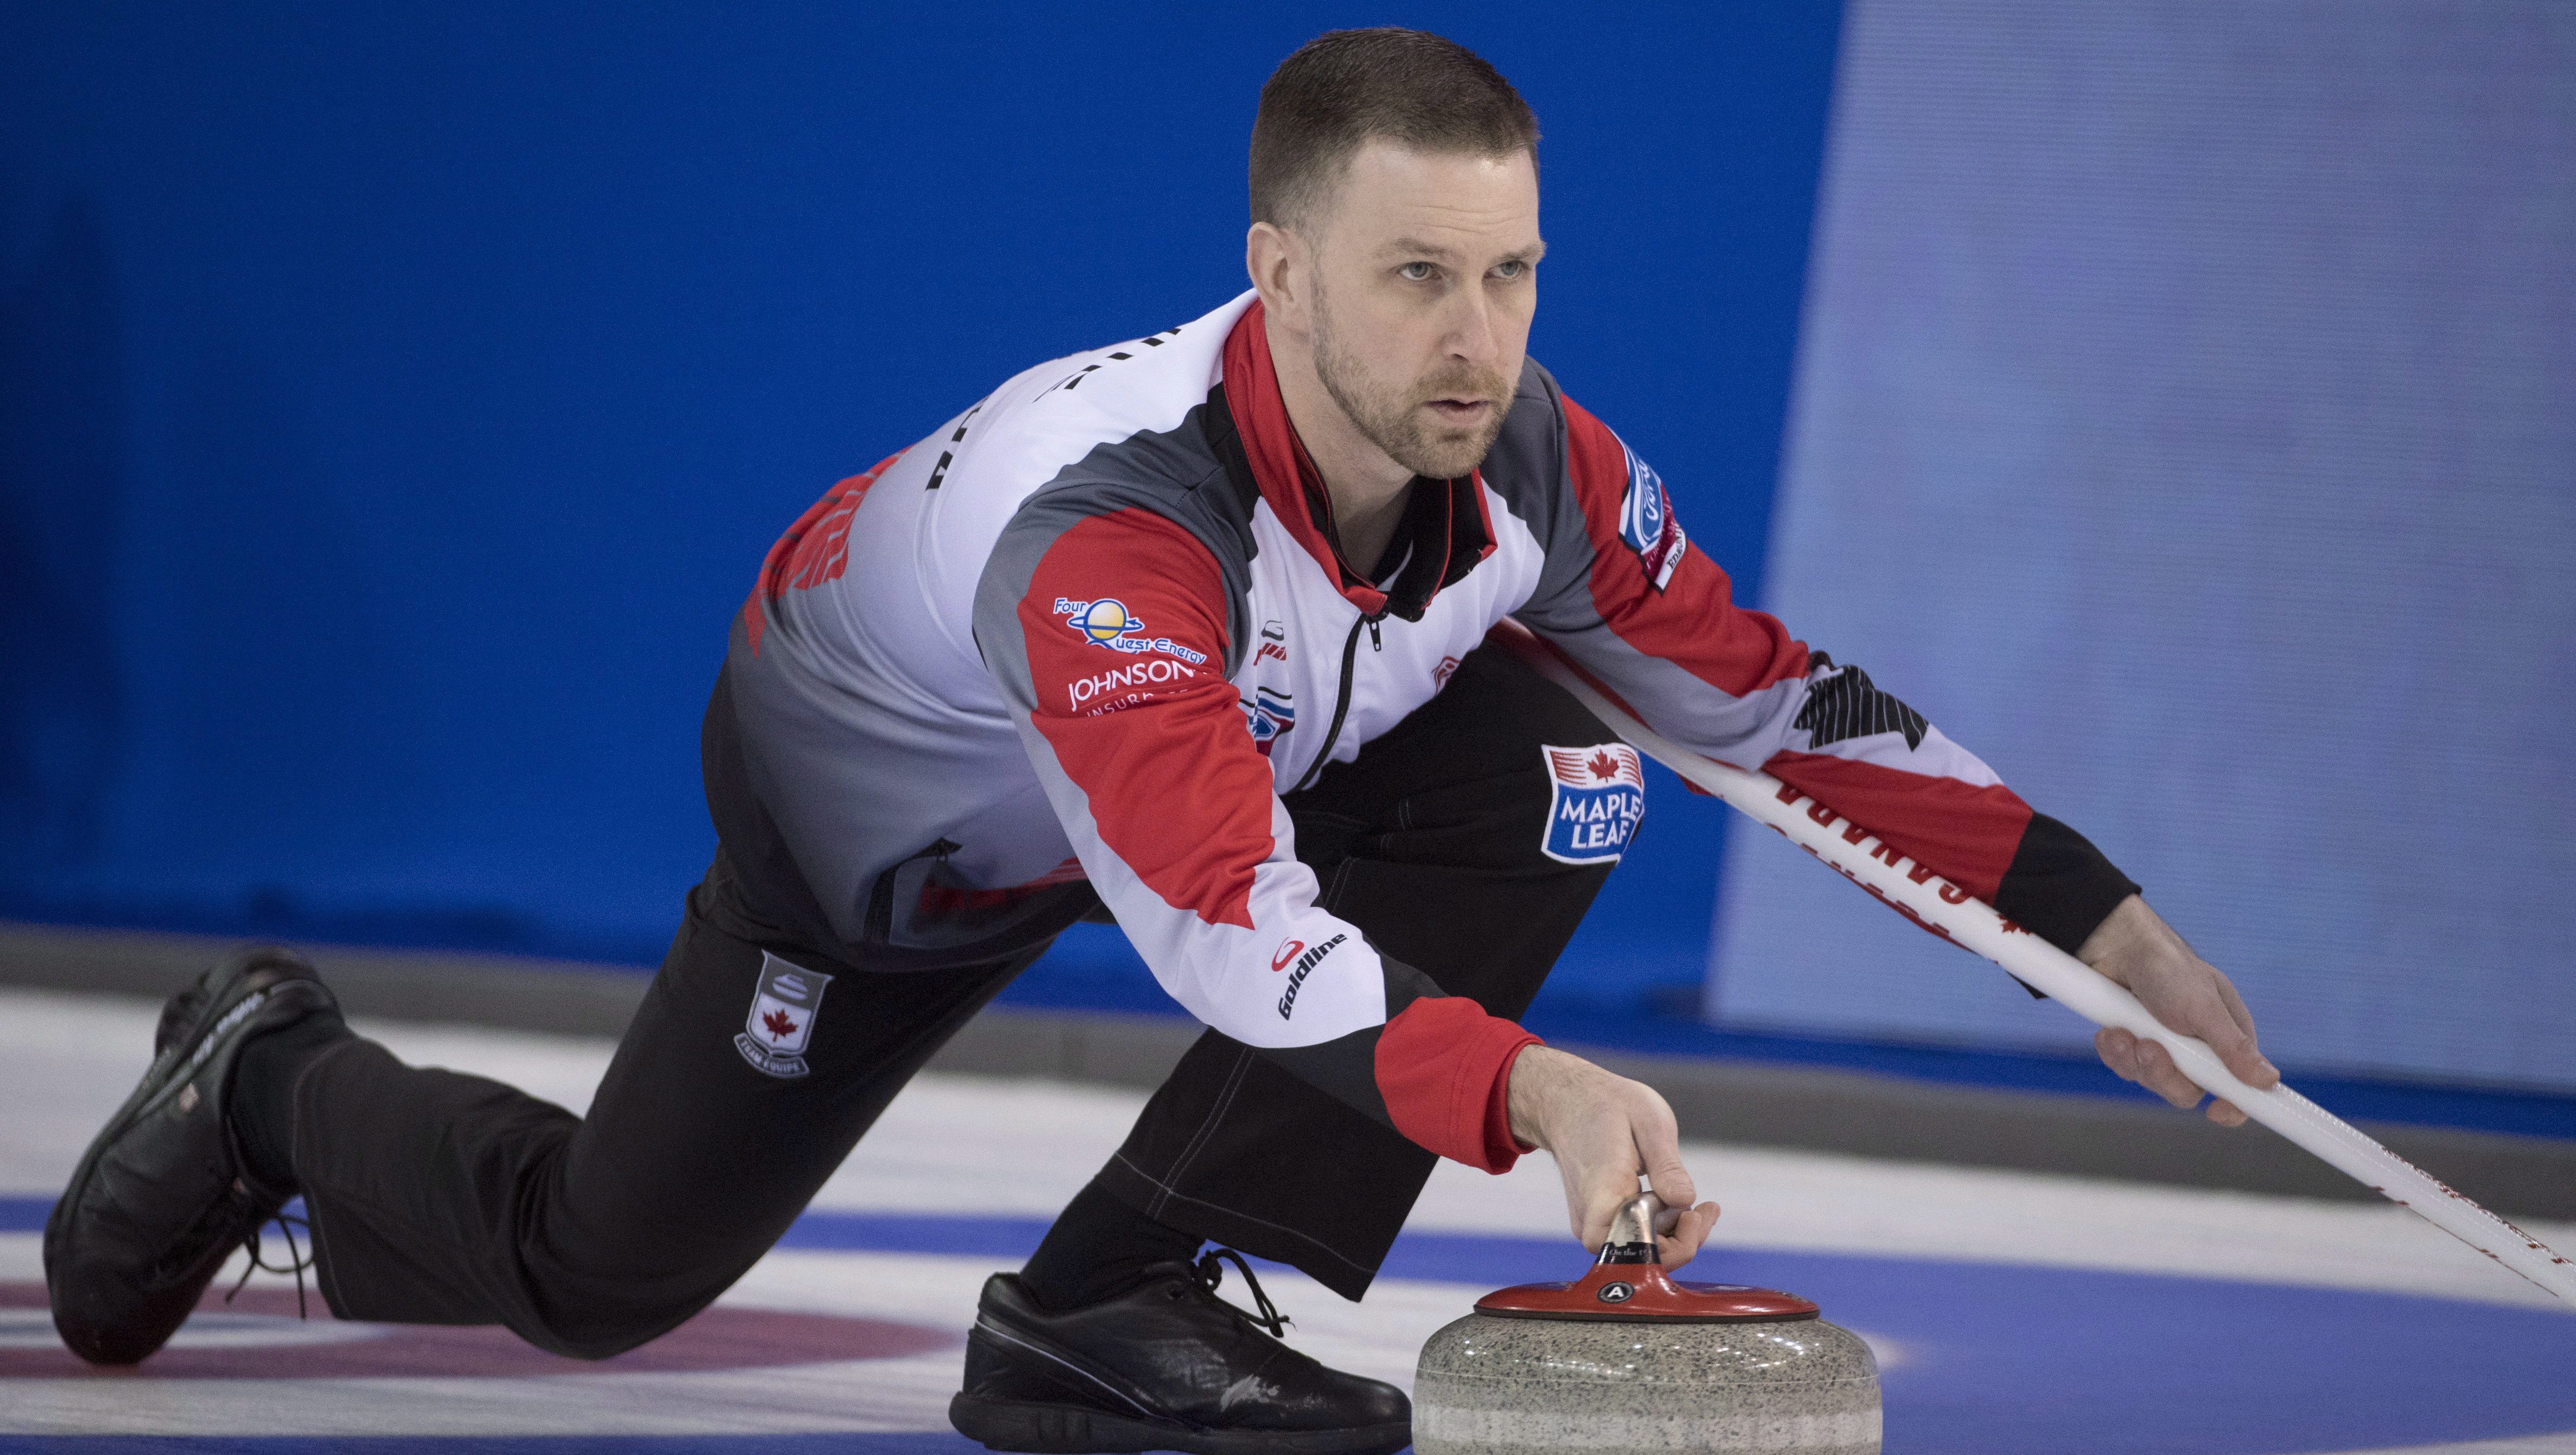 Team Canada undefeated, clinches playoff spot at men’s curling worlds | Team Canada - Official